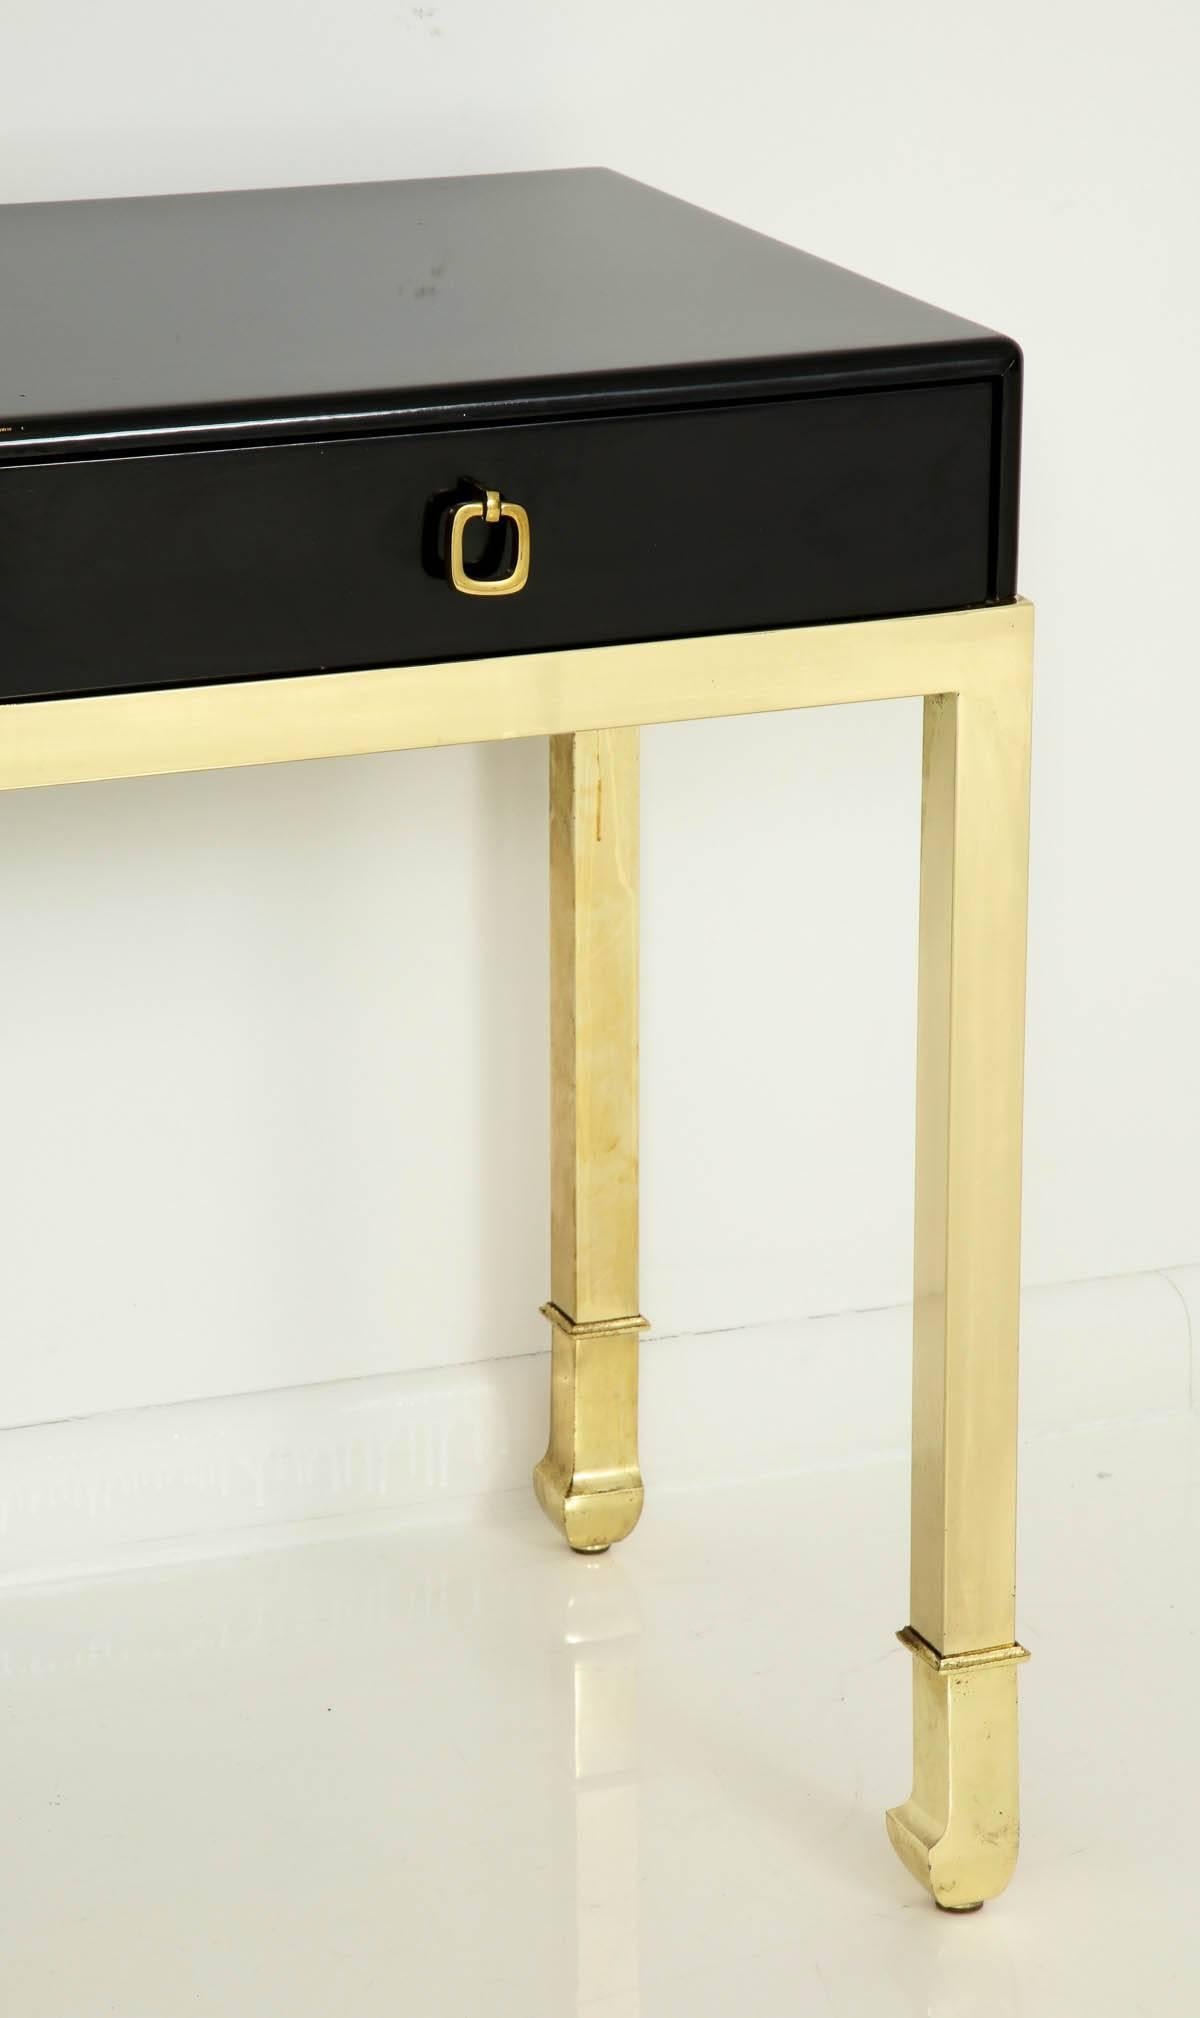 Elegant 1980s Design Institute of America console/desk.
It retains the original high gloss black lacquer finish with brass legs and hardware and it is in great condition with minimal age appropriate wear.
It could be used in a variety of ways such